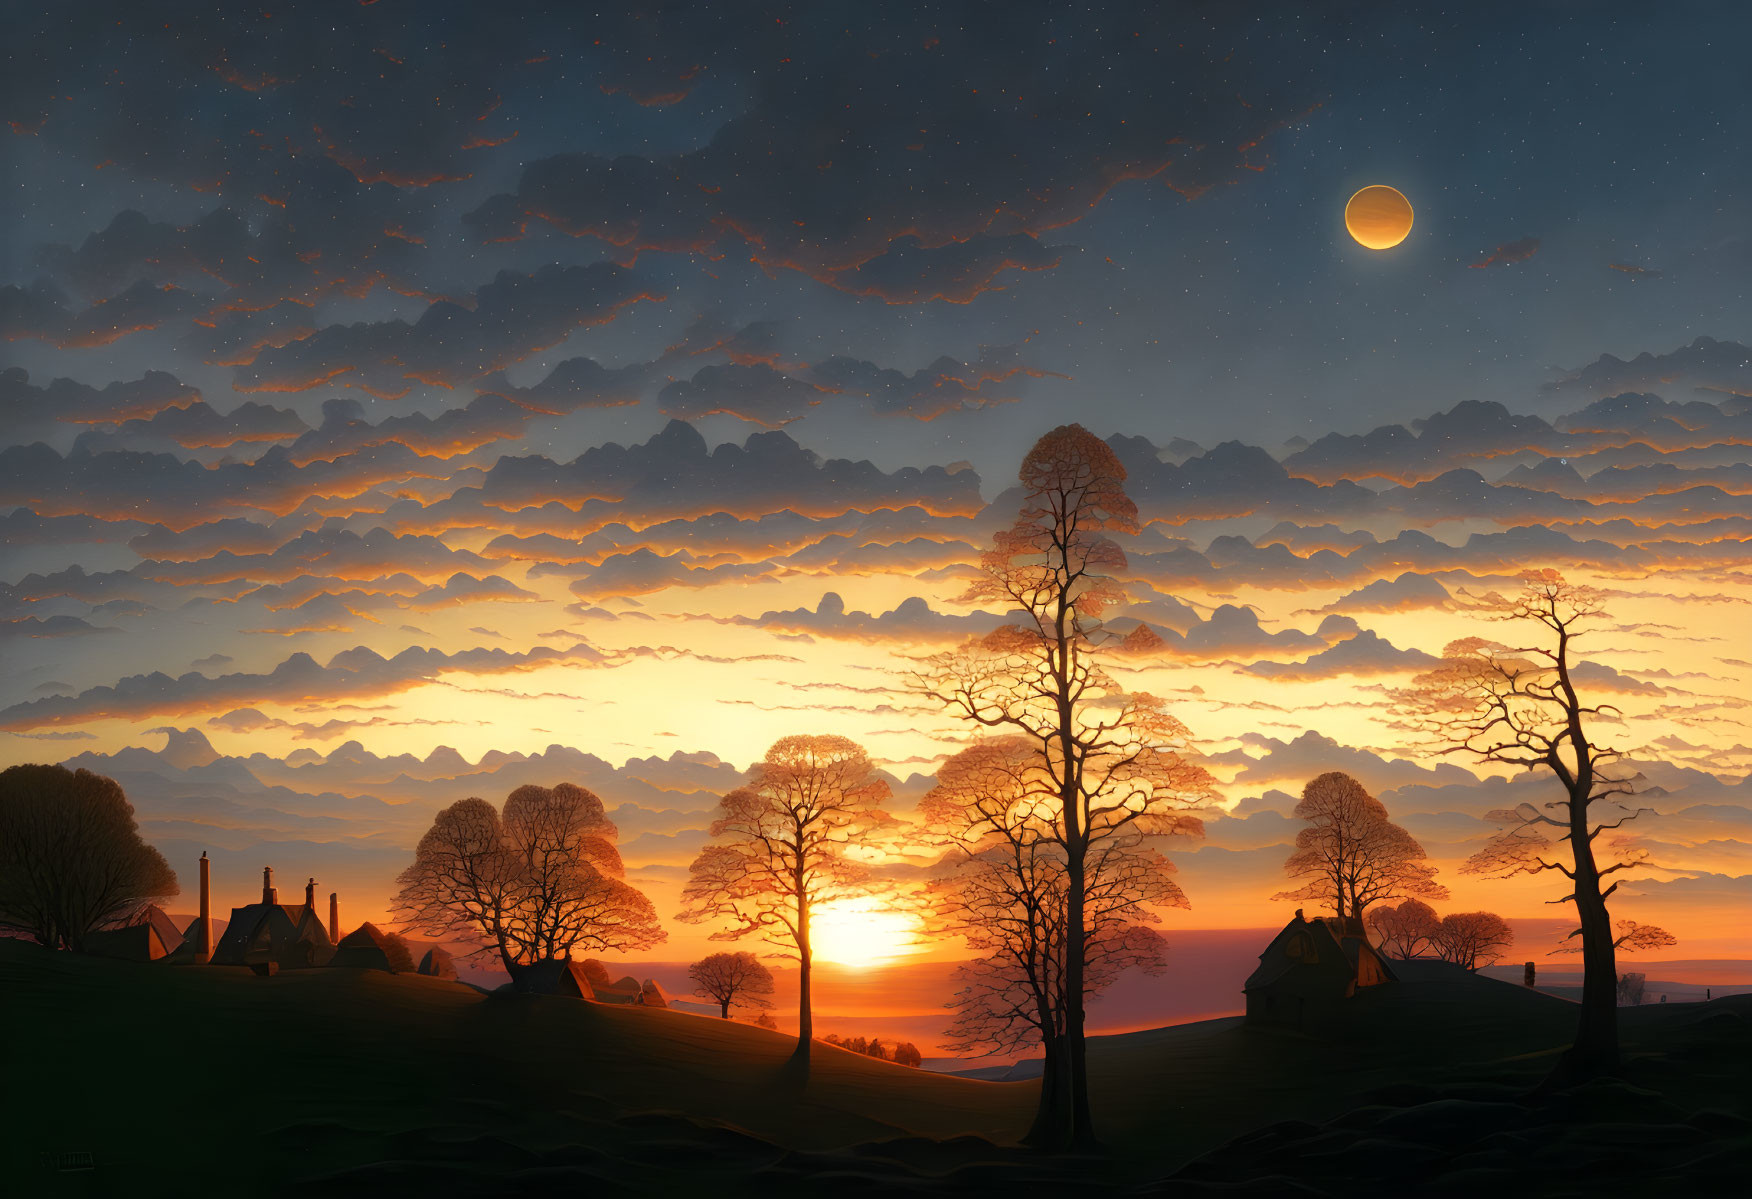 Tranquil dusk landscape with silhouetted trees, crescent moon, and warm sunset behind